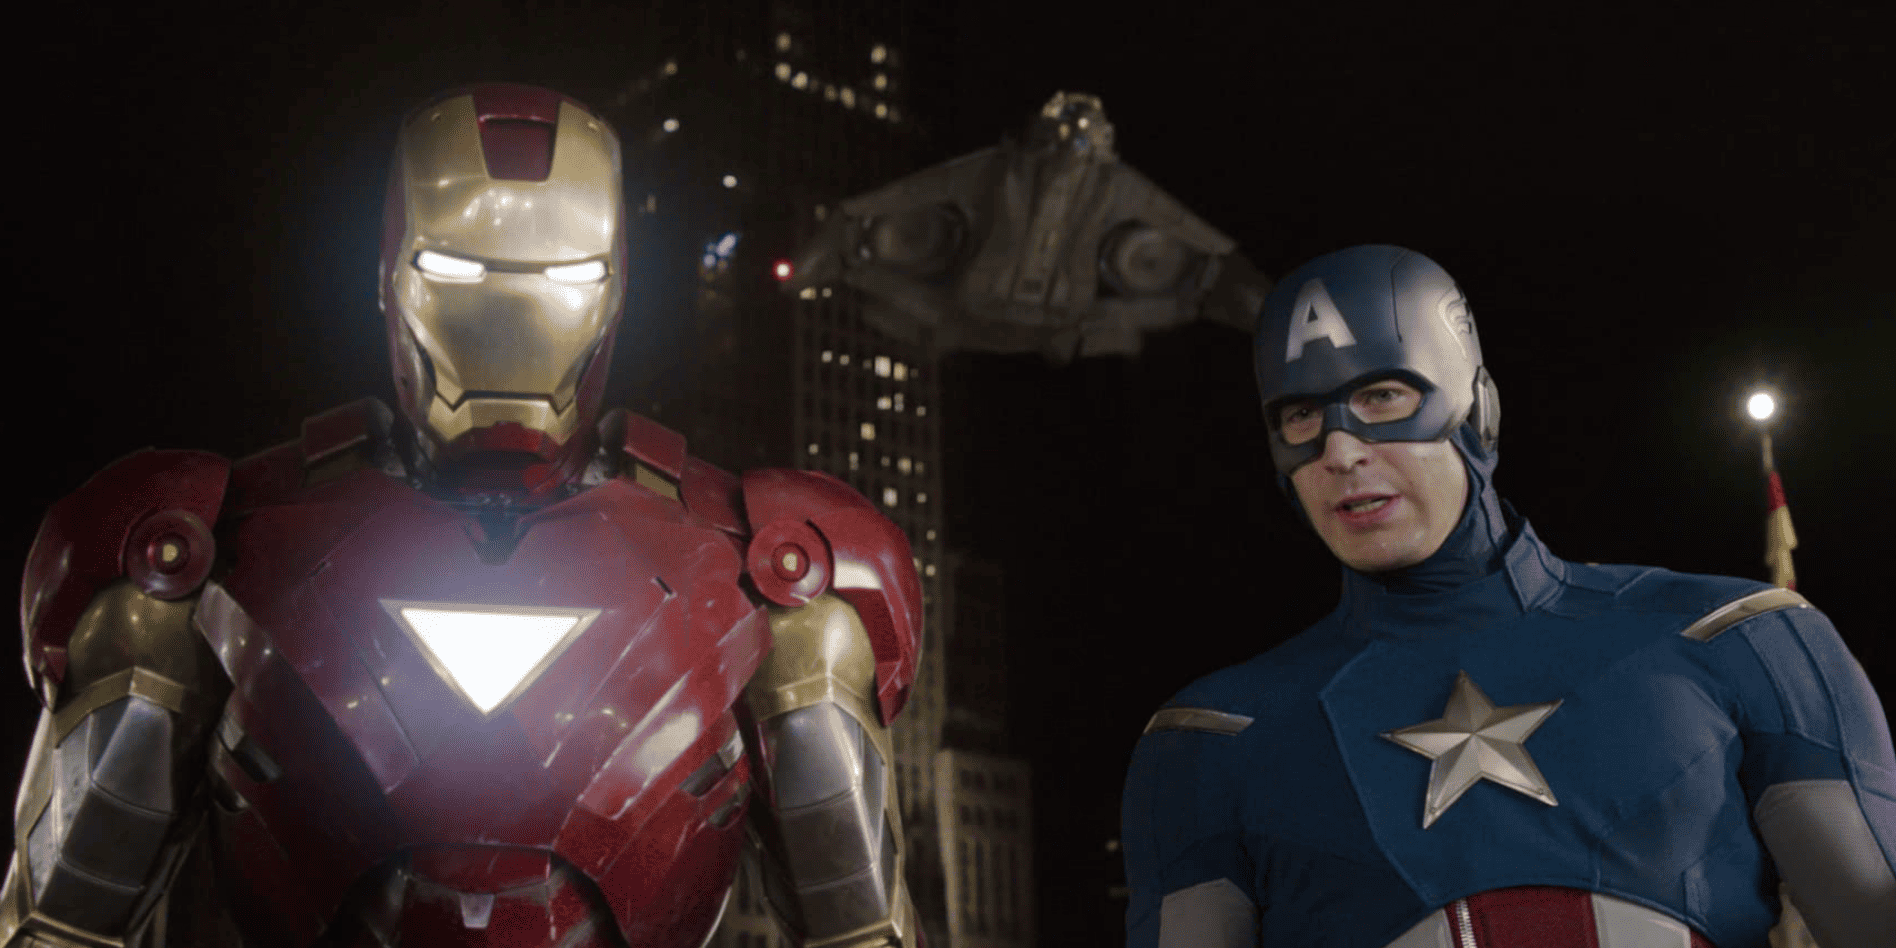 Iron Man and Captain America stand side by side with the jet behind them in this image from Marvel Studios